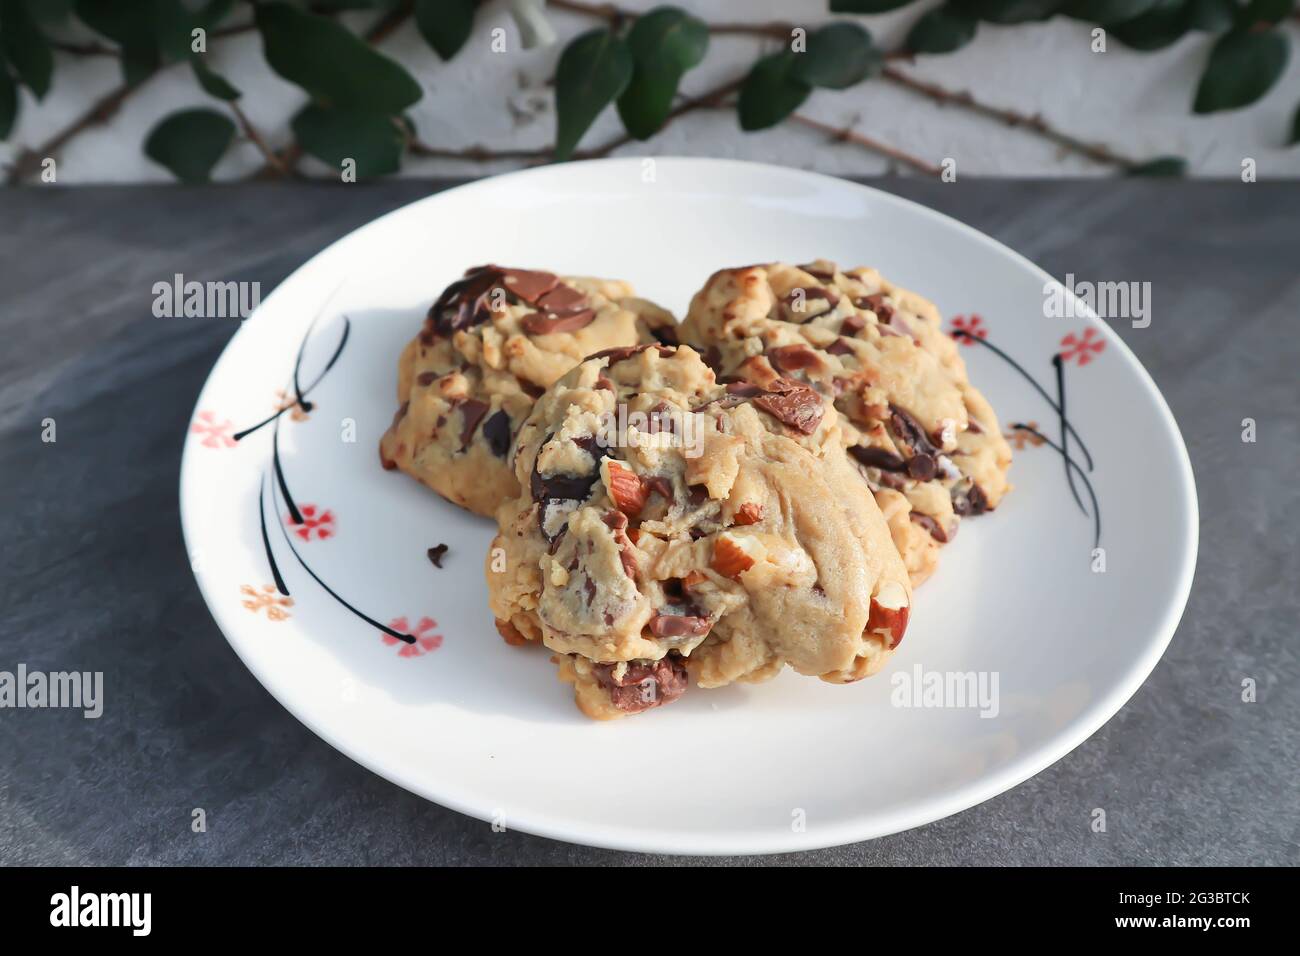 cookie, cooky or almond cookie or chocolate cookie for serve Stock Photo